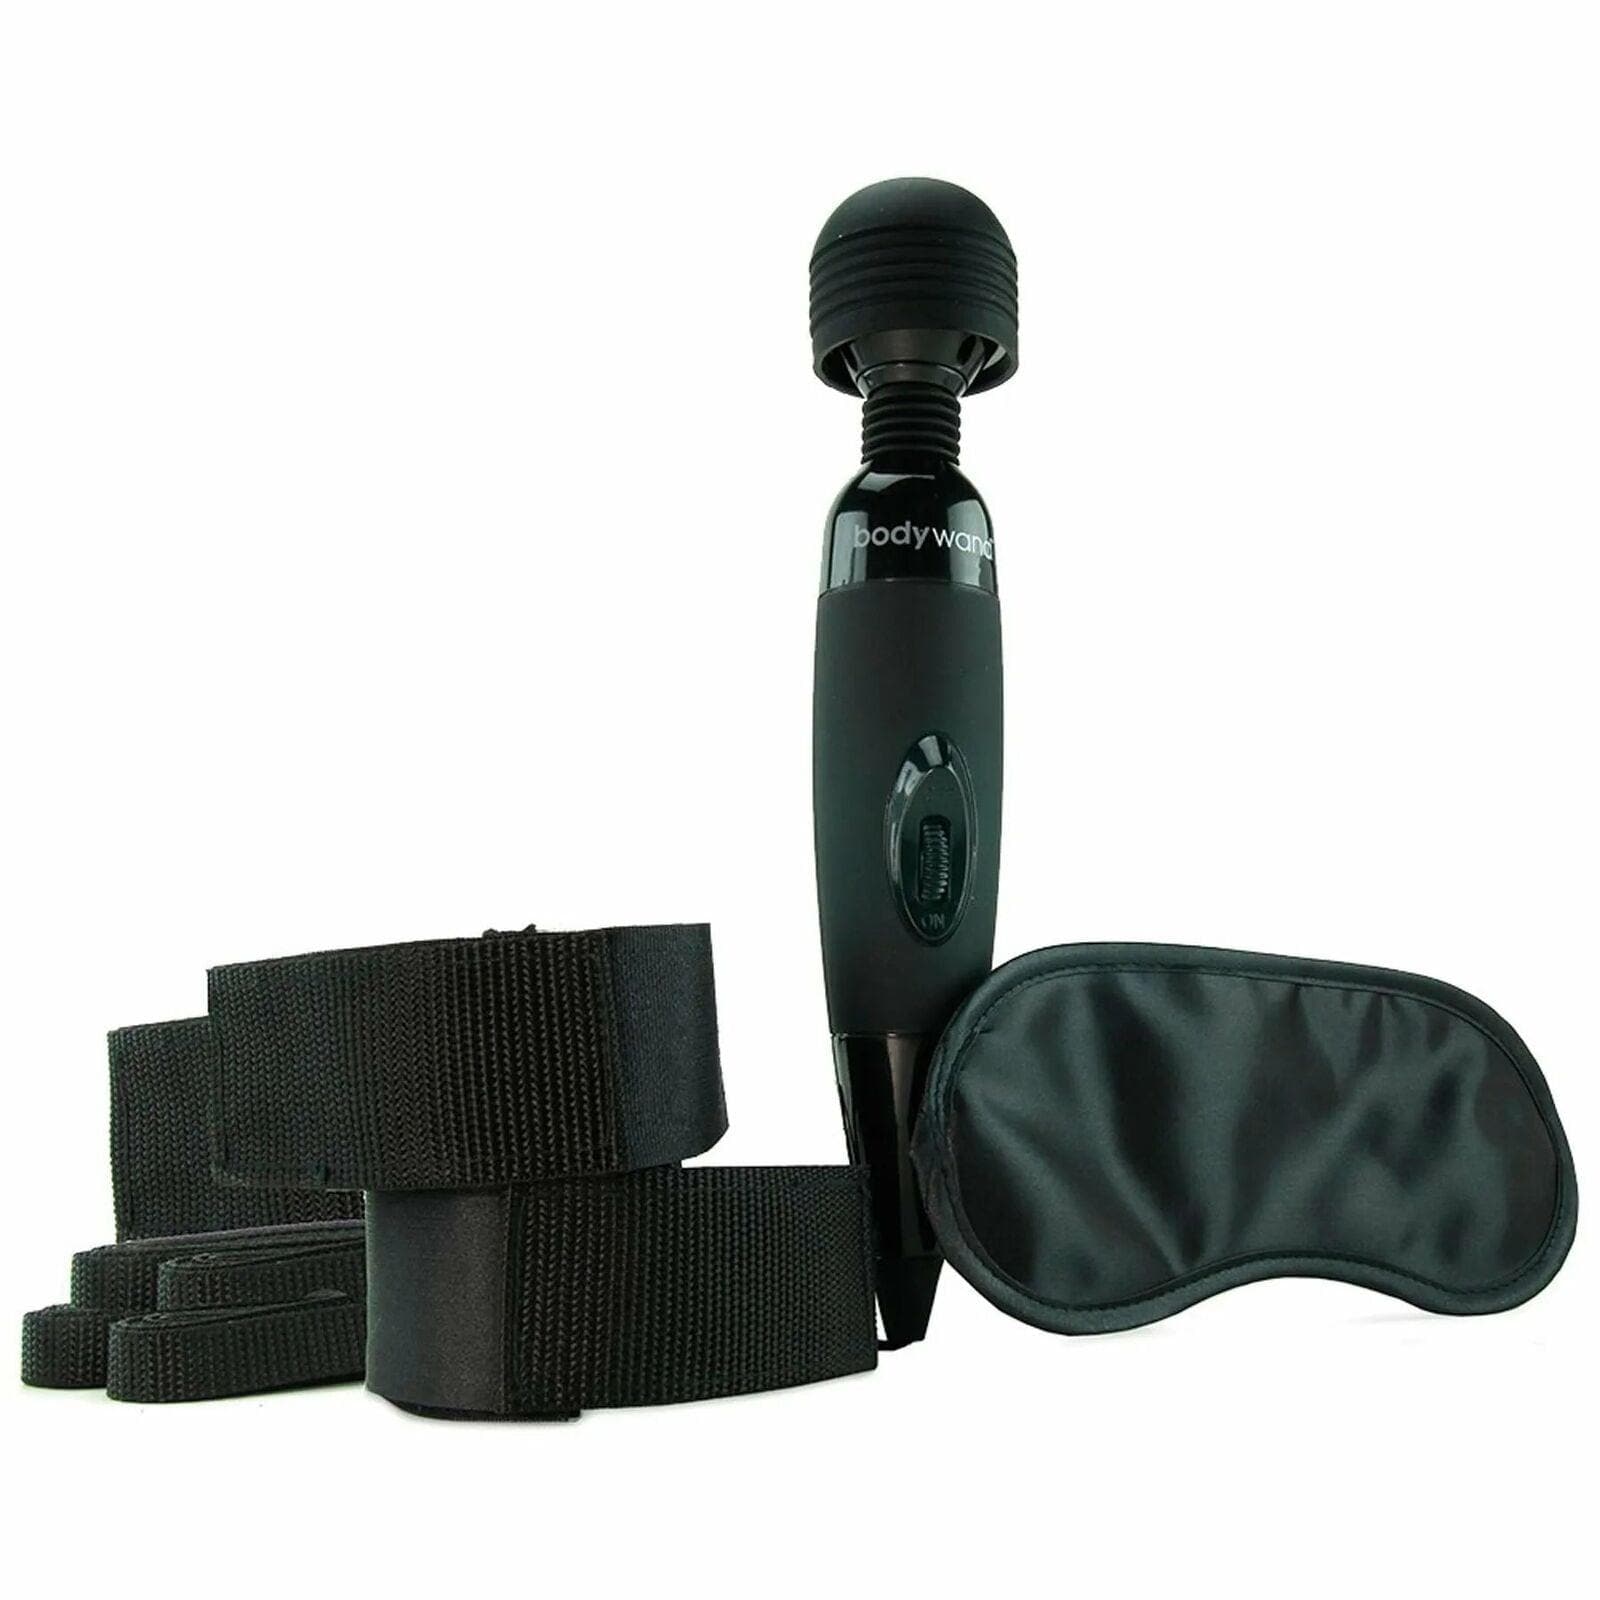 Bodywand Midnight Bed Spreader Kit Couples Collection Gift Set Black - Romantic Blessings